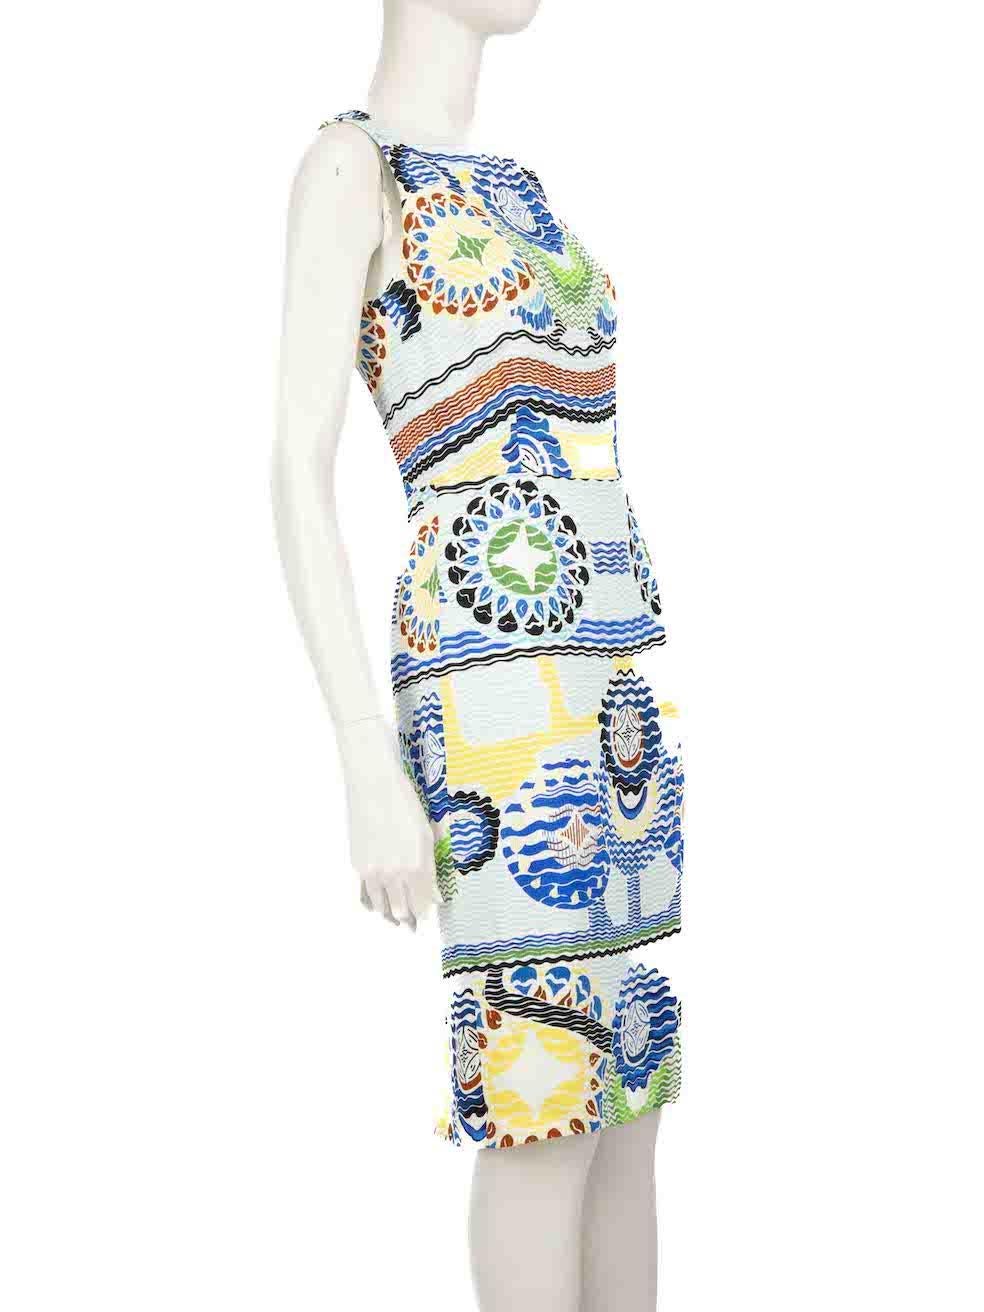 CONDITION is Very good. Minimal wear to dress is evident. Minimal wear is seen with little wear on the front and back with pulls in the weave and a discolouration mark close to the front hemline and on the back on this used Peter Pilotto designer